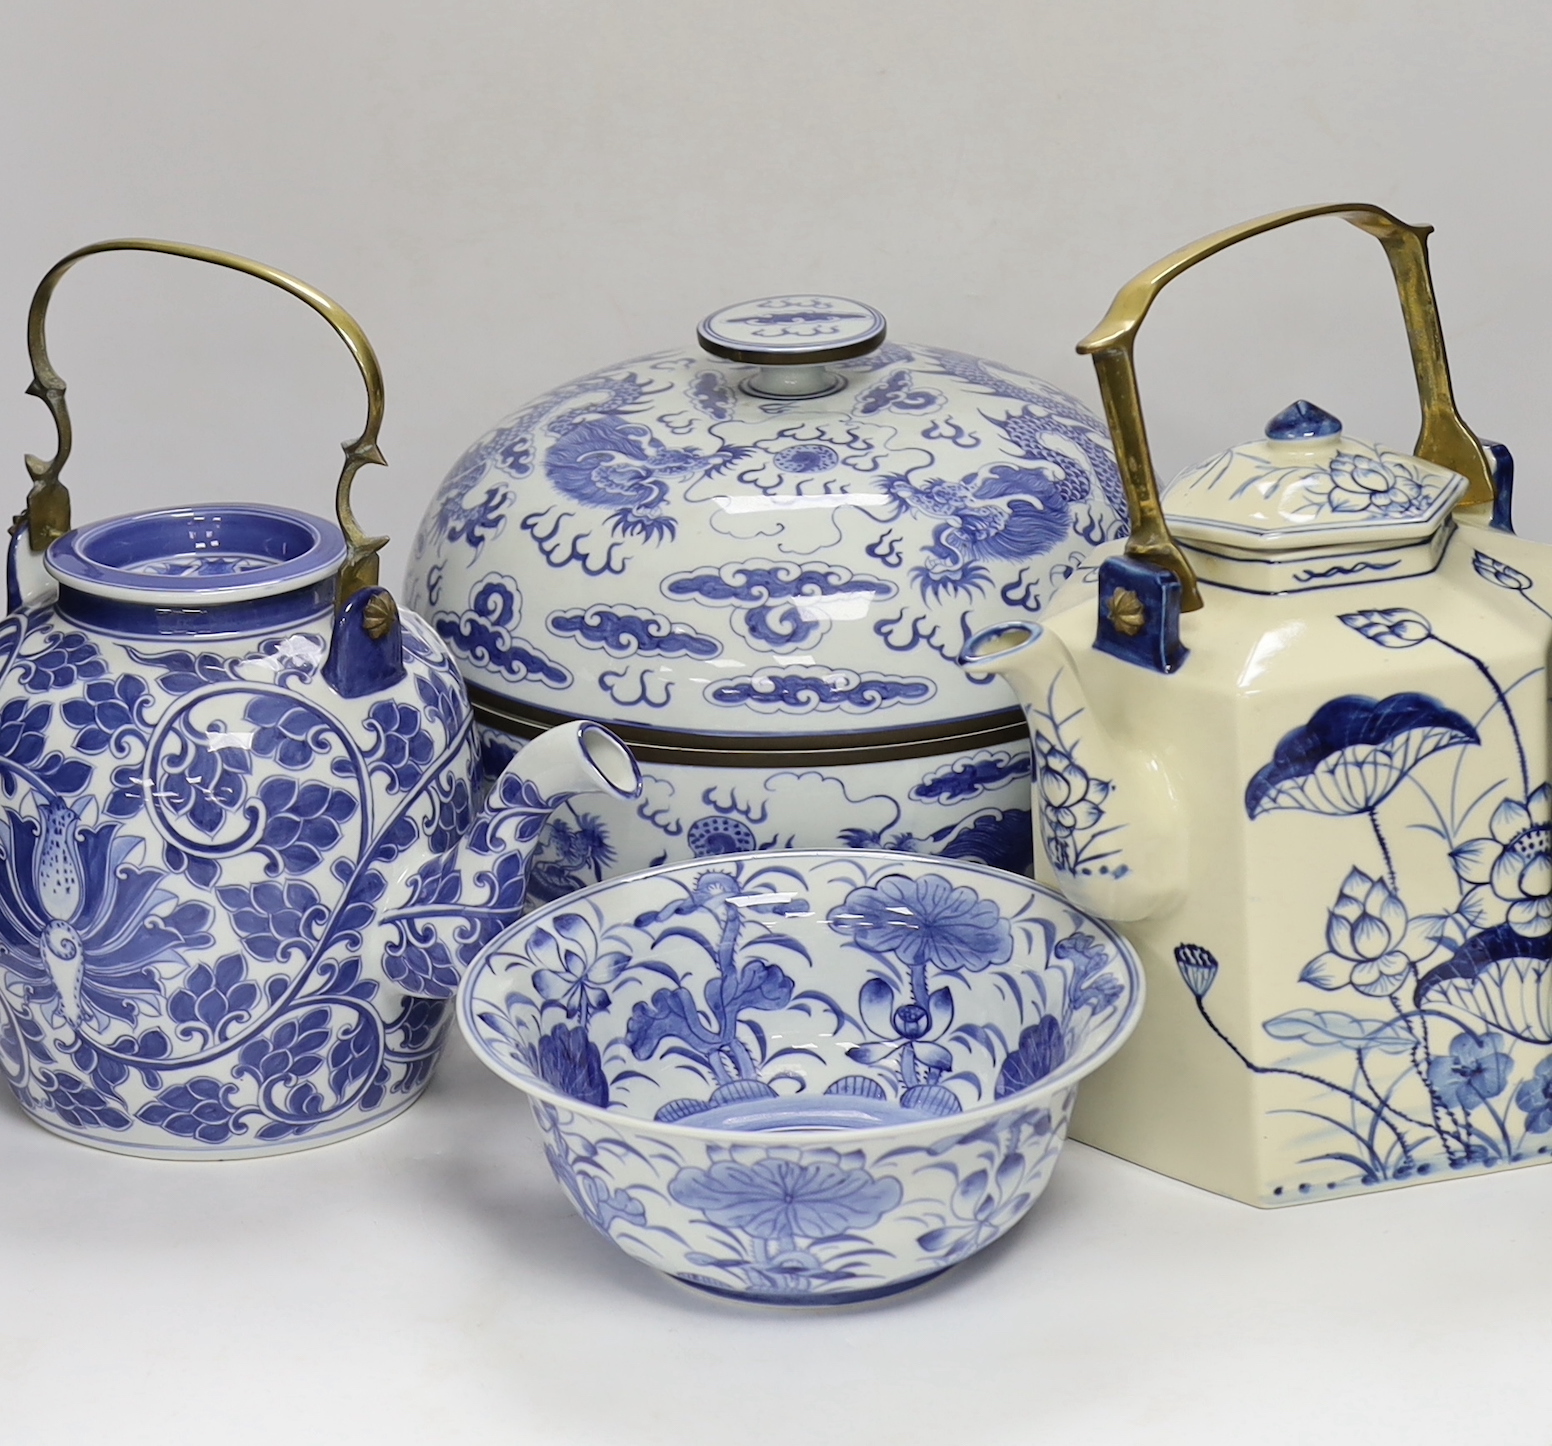 Four modern Chinese blue and white ceramic items; two teapots, a lidded vessel and a bowl, tallest 23.5cm